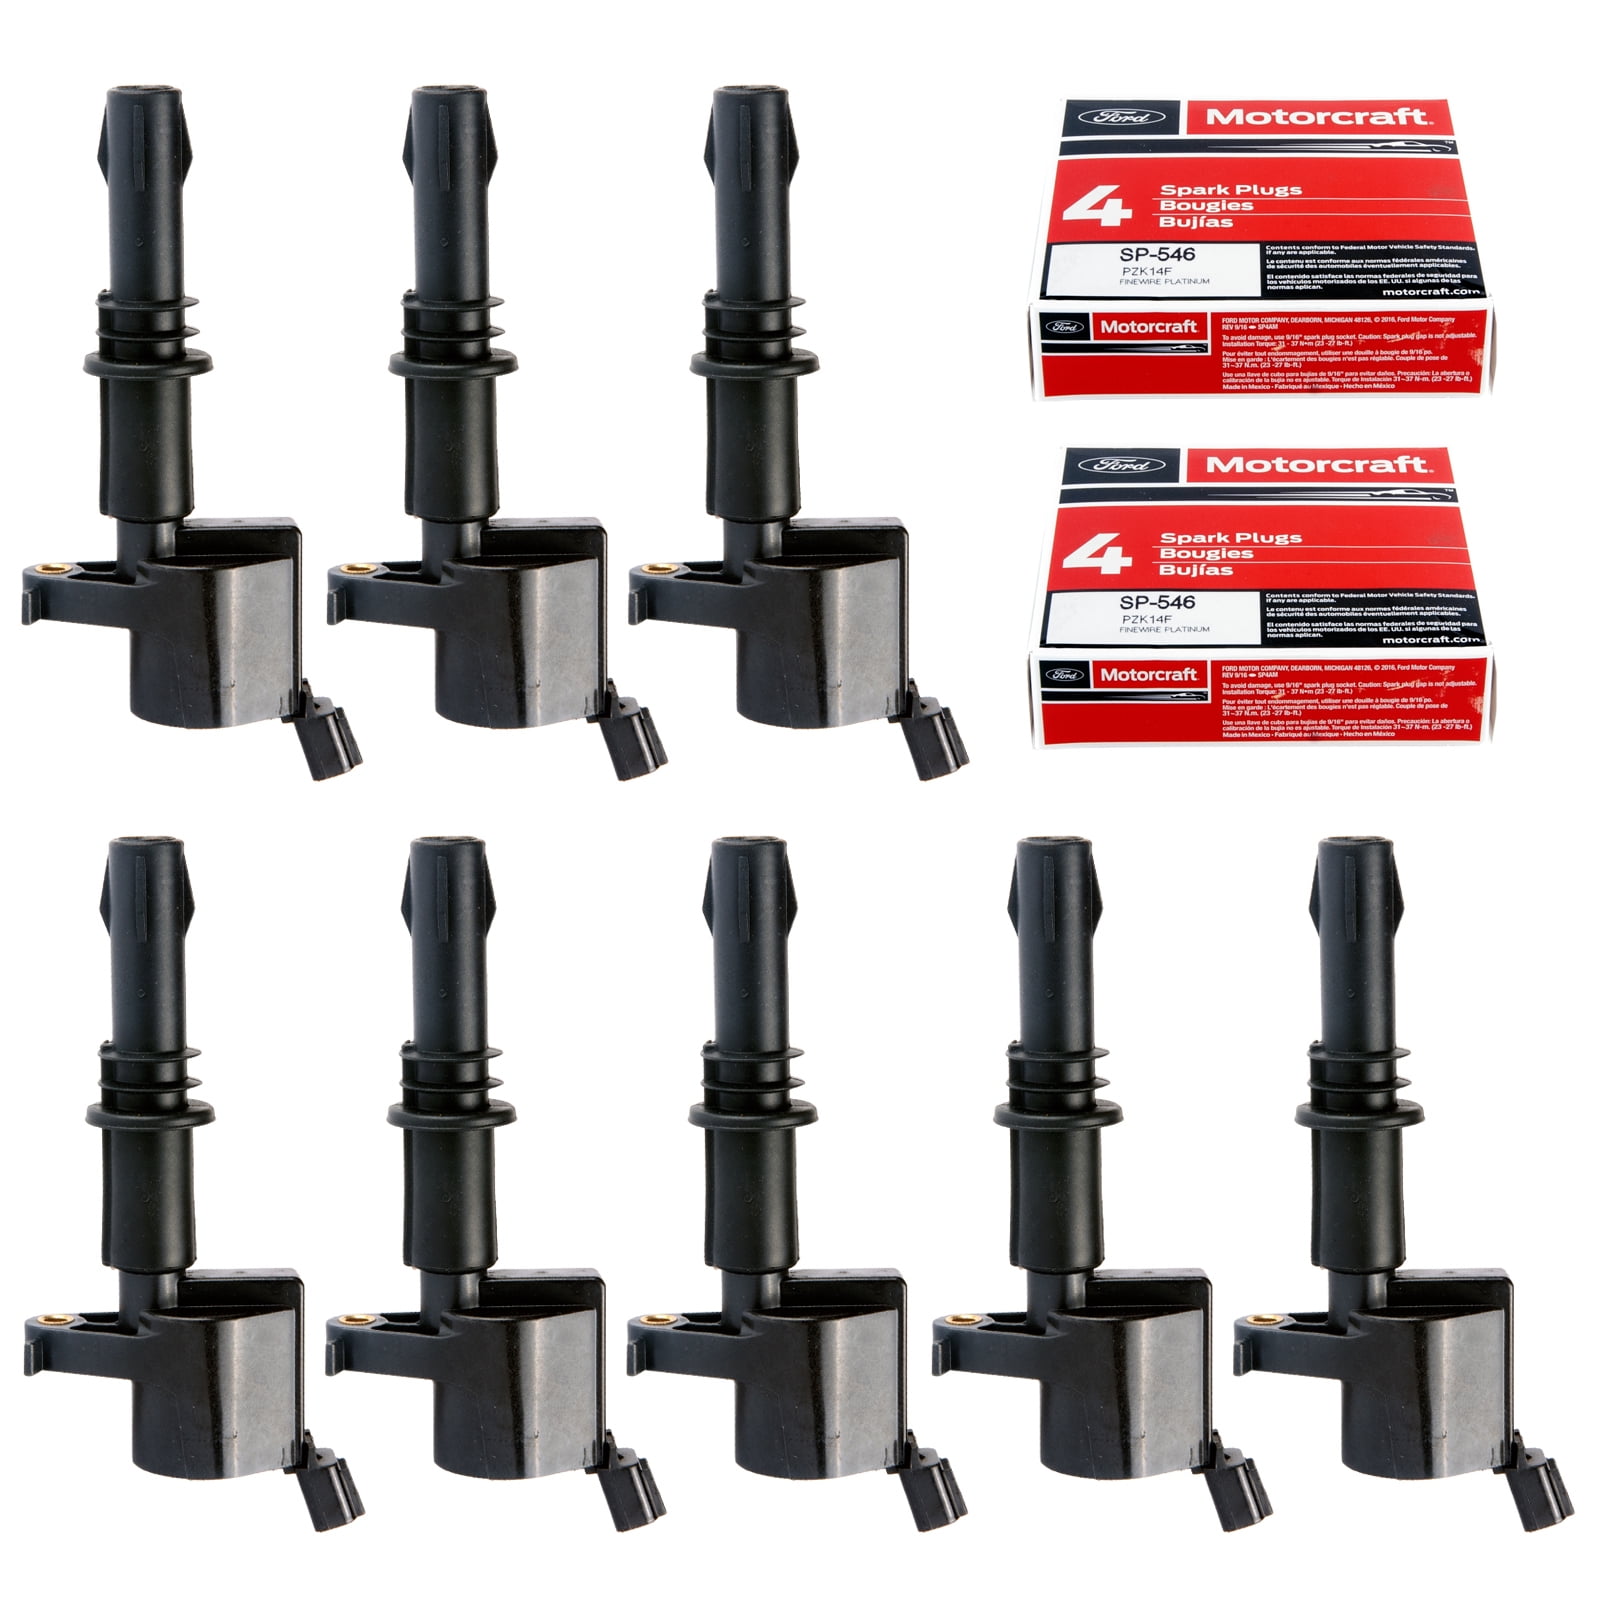 SET OF 8 REPLACEMENT HEAVY DUTY IGNITION COIL DG511B & MOTORCRAFT SP515/SP546